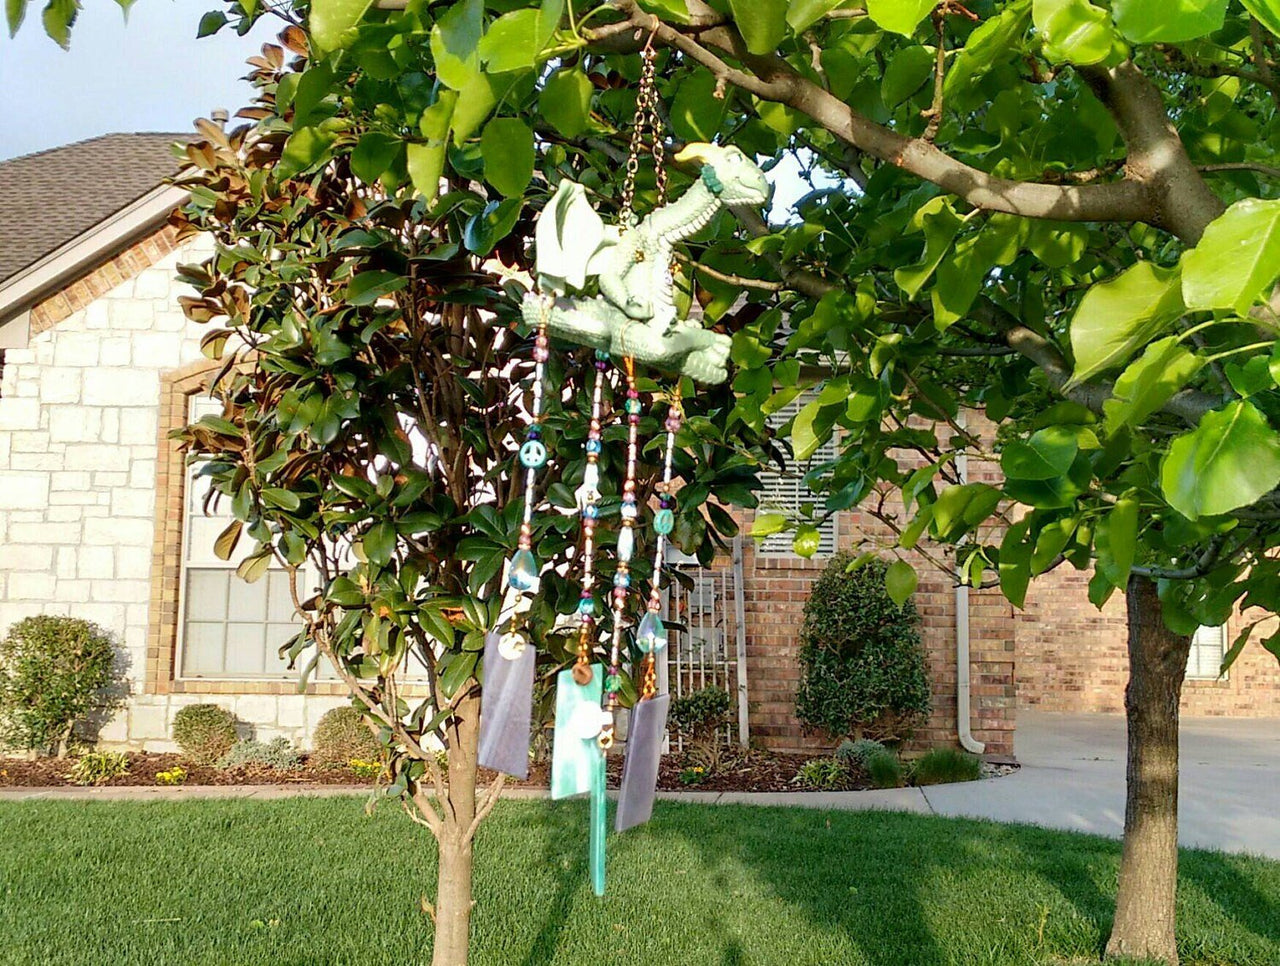 Handcrafted peace dragon wind chime garden ornament